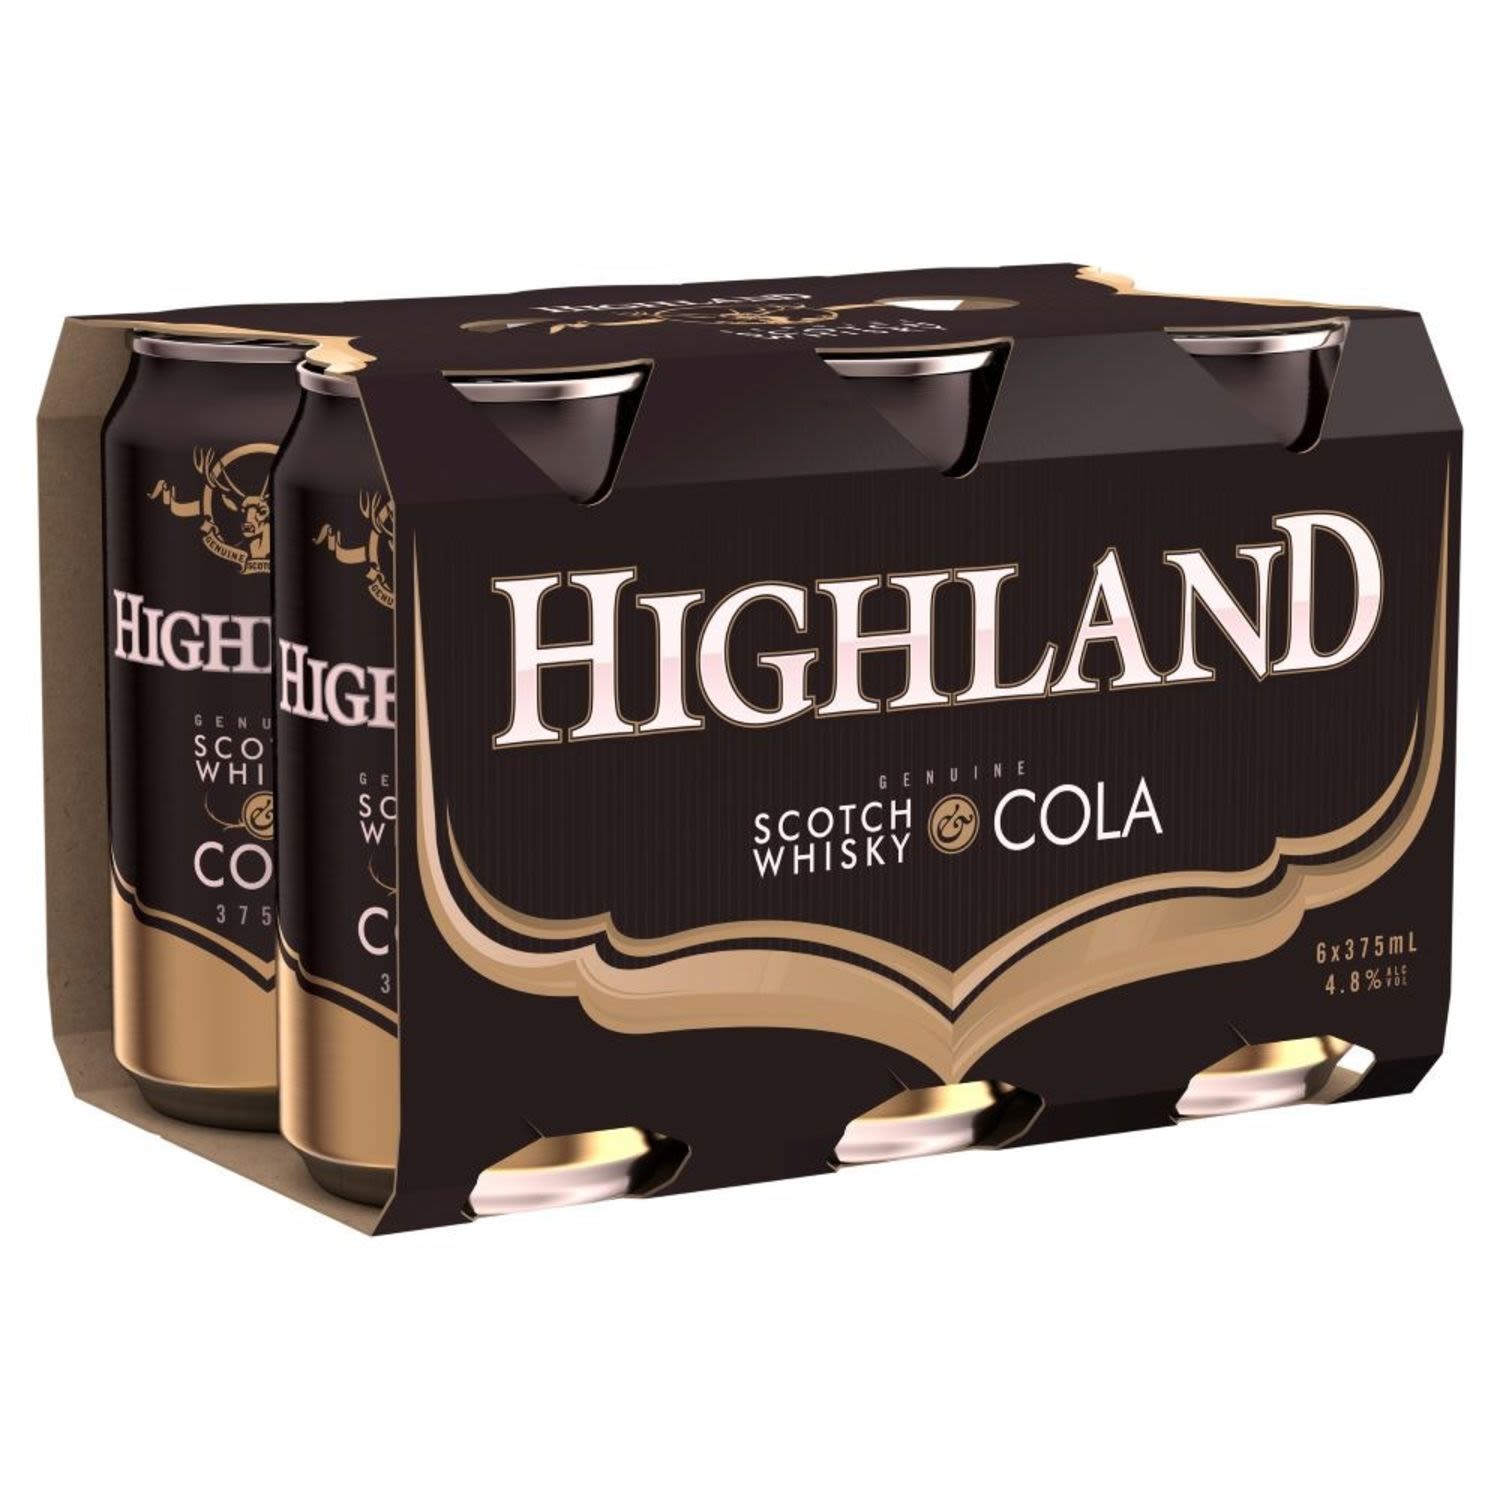 Highland Genuine Scotch Whisky & Cola 4.8% Can 375mL 6 Pack